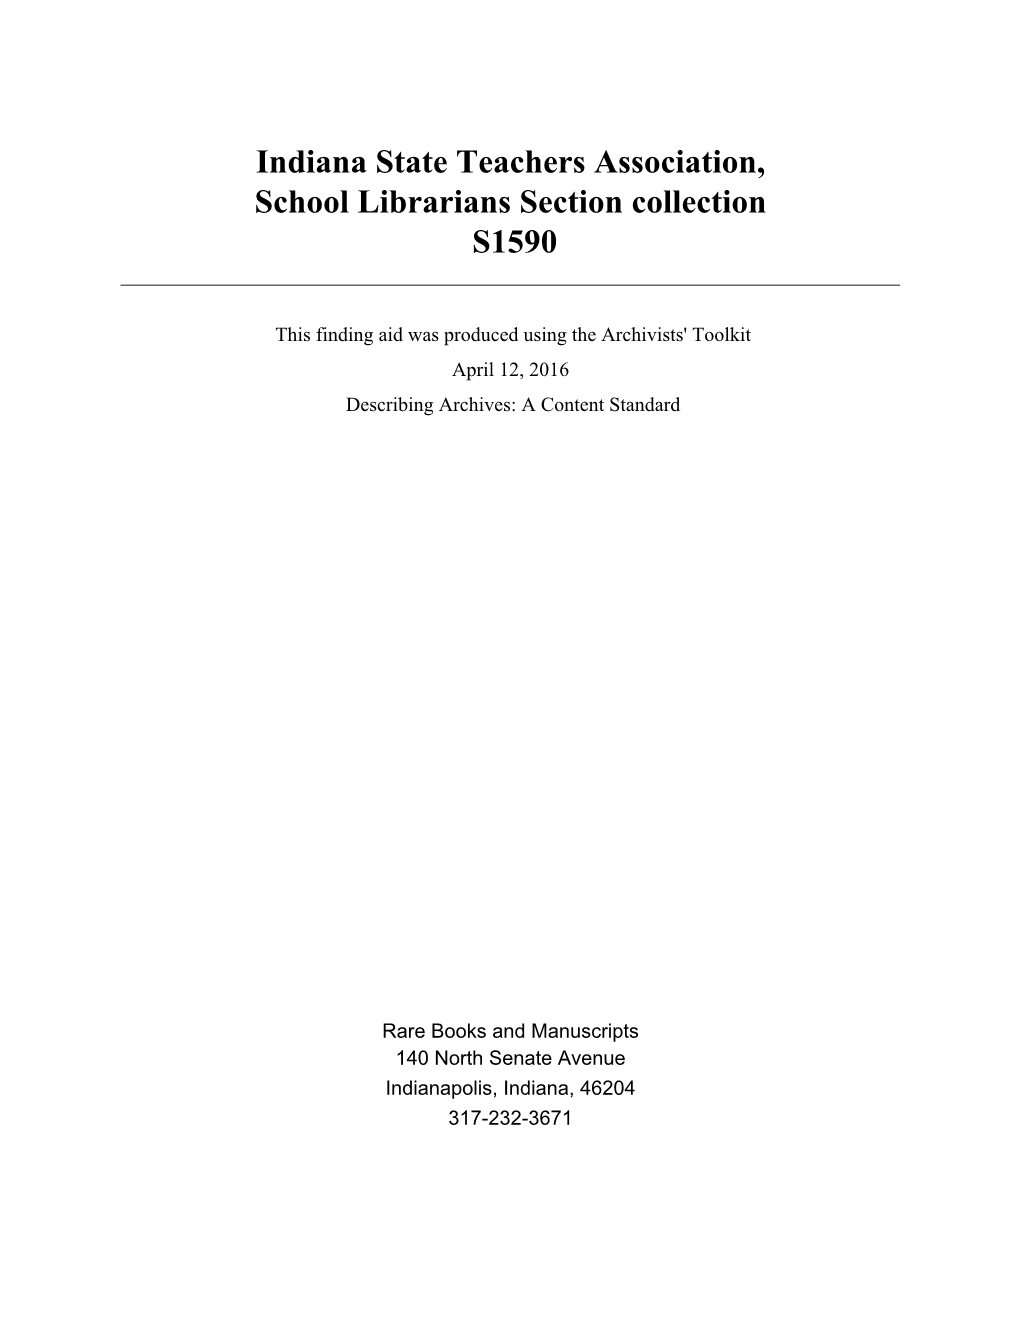 Indiana State Teachers Association, School Librarians Section Collection S1590